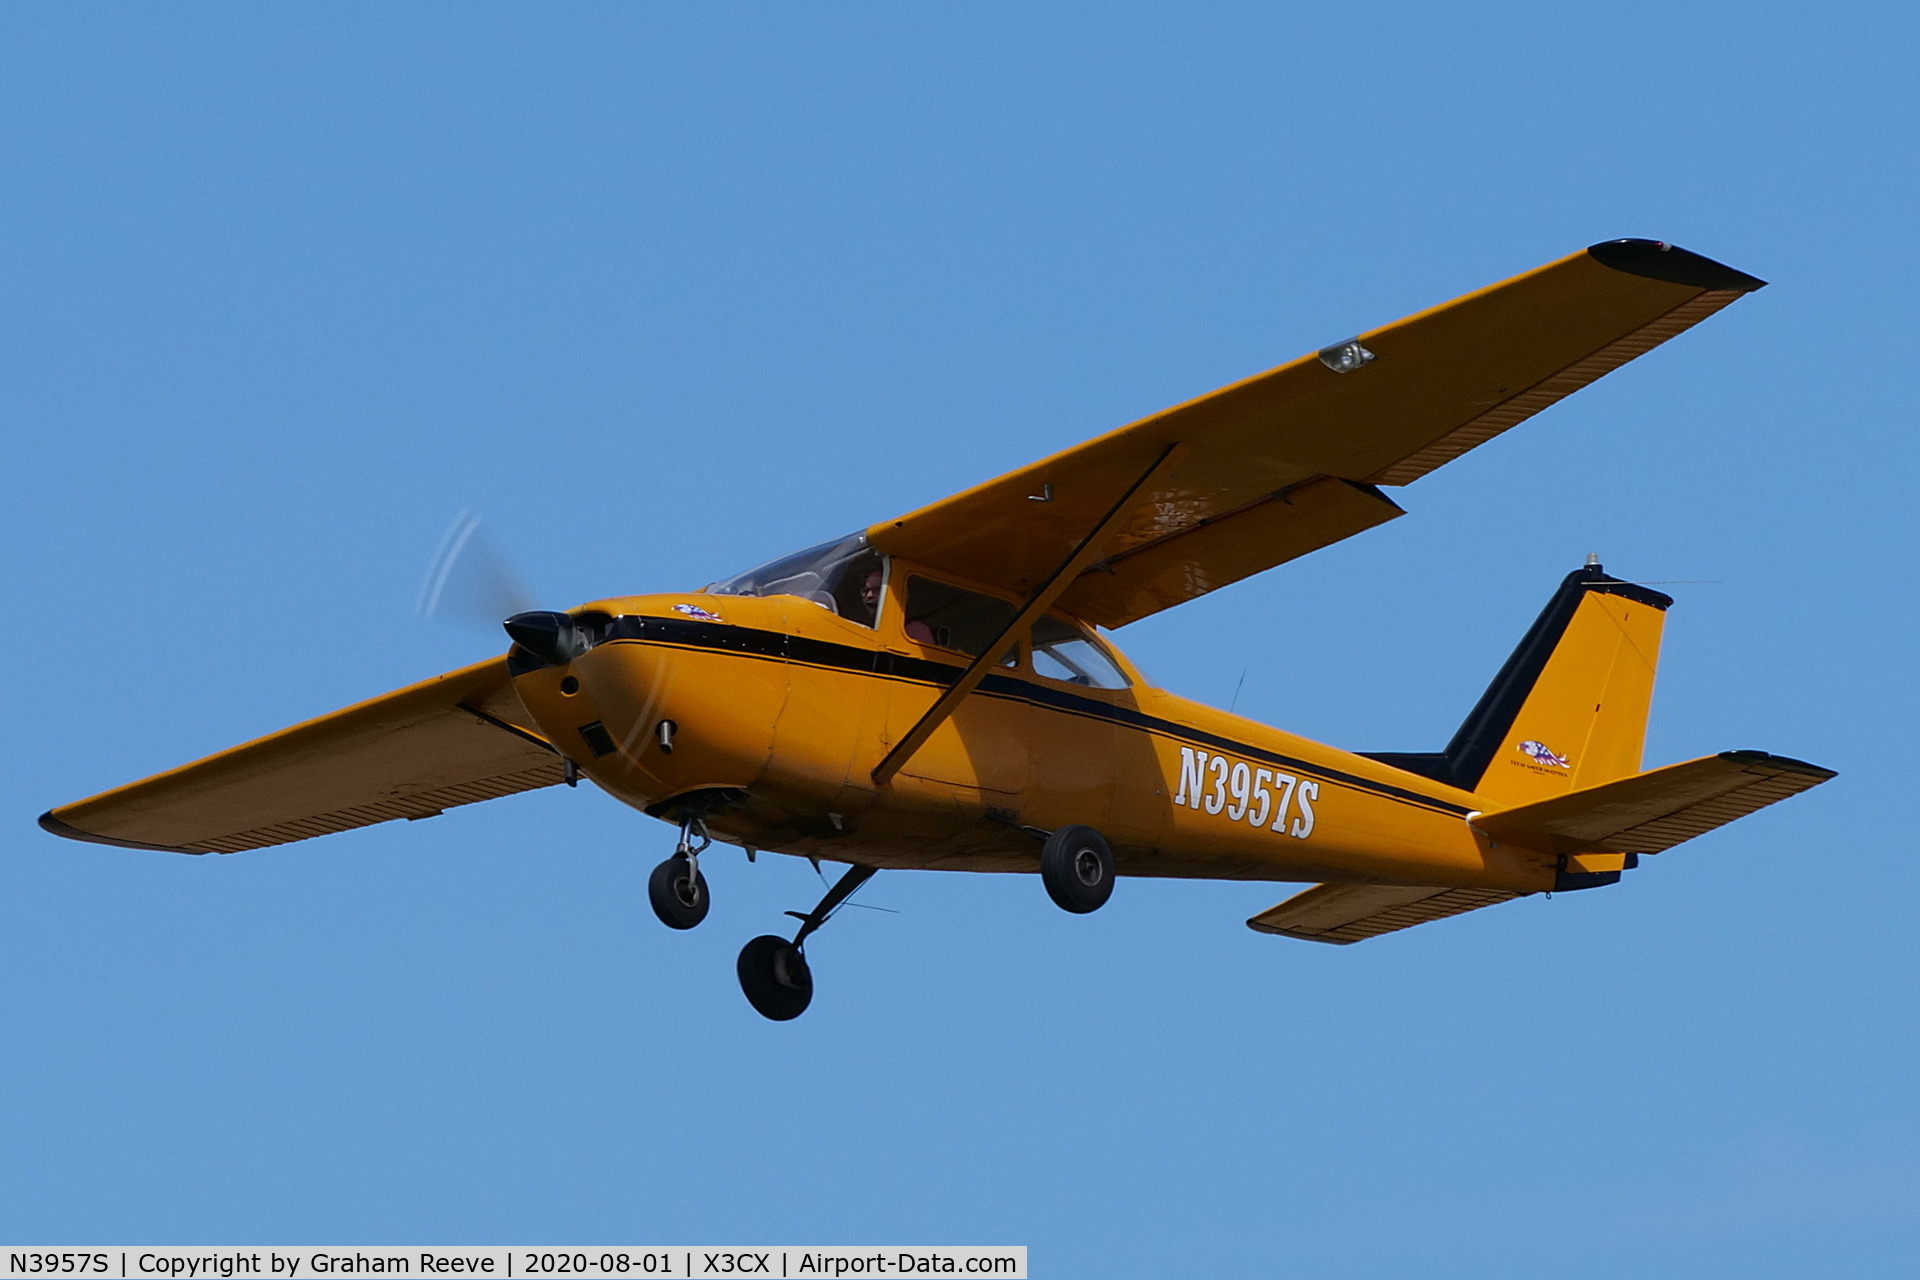 N3957S, 1964 Cessna 172E C/N 17251157, Departing from Northrepps.